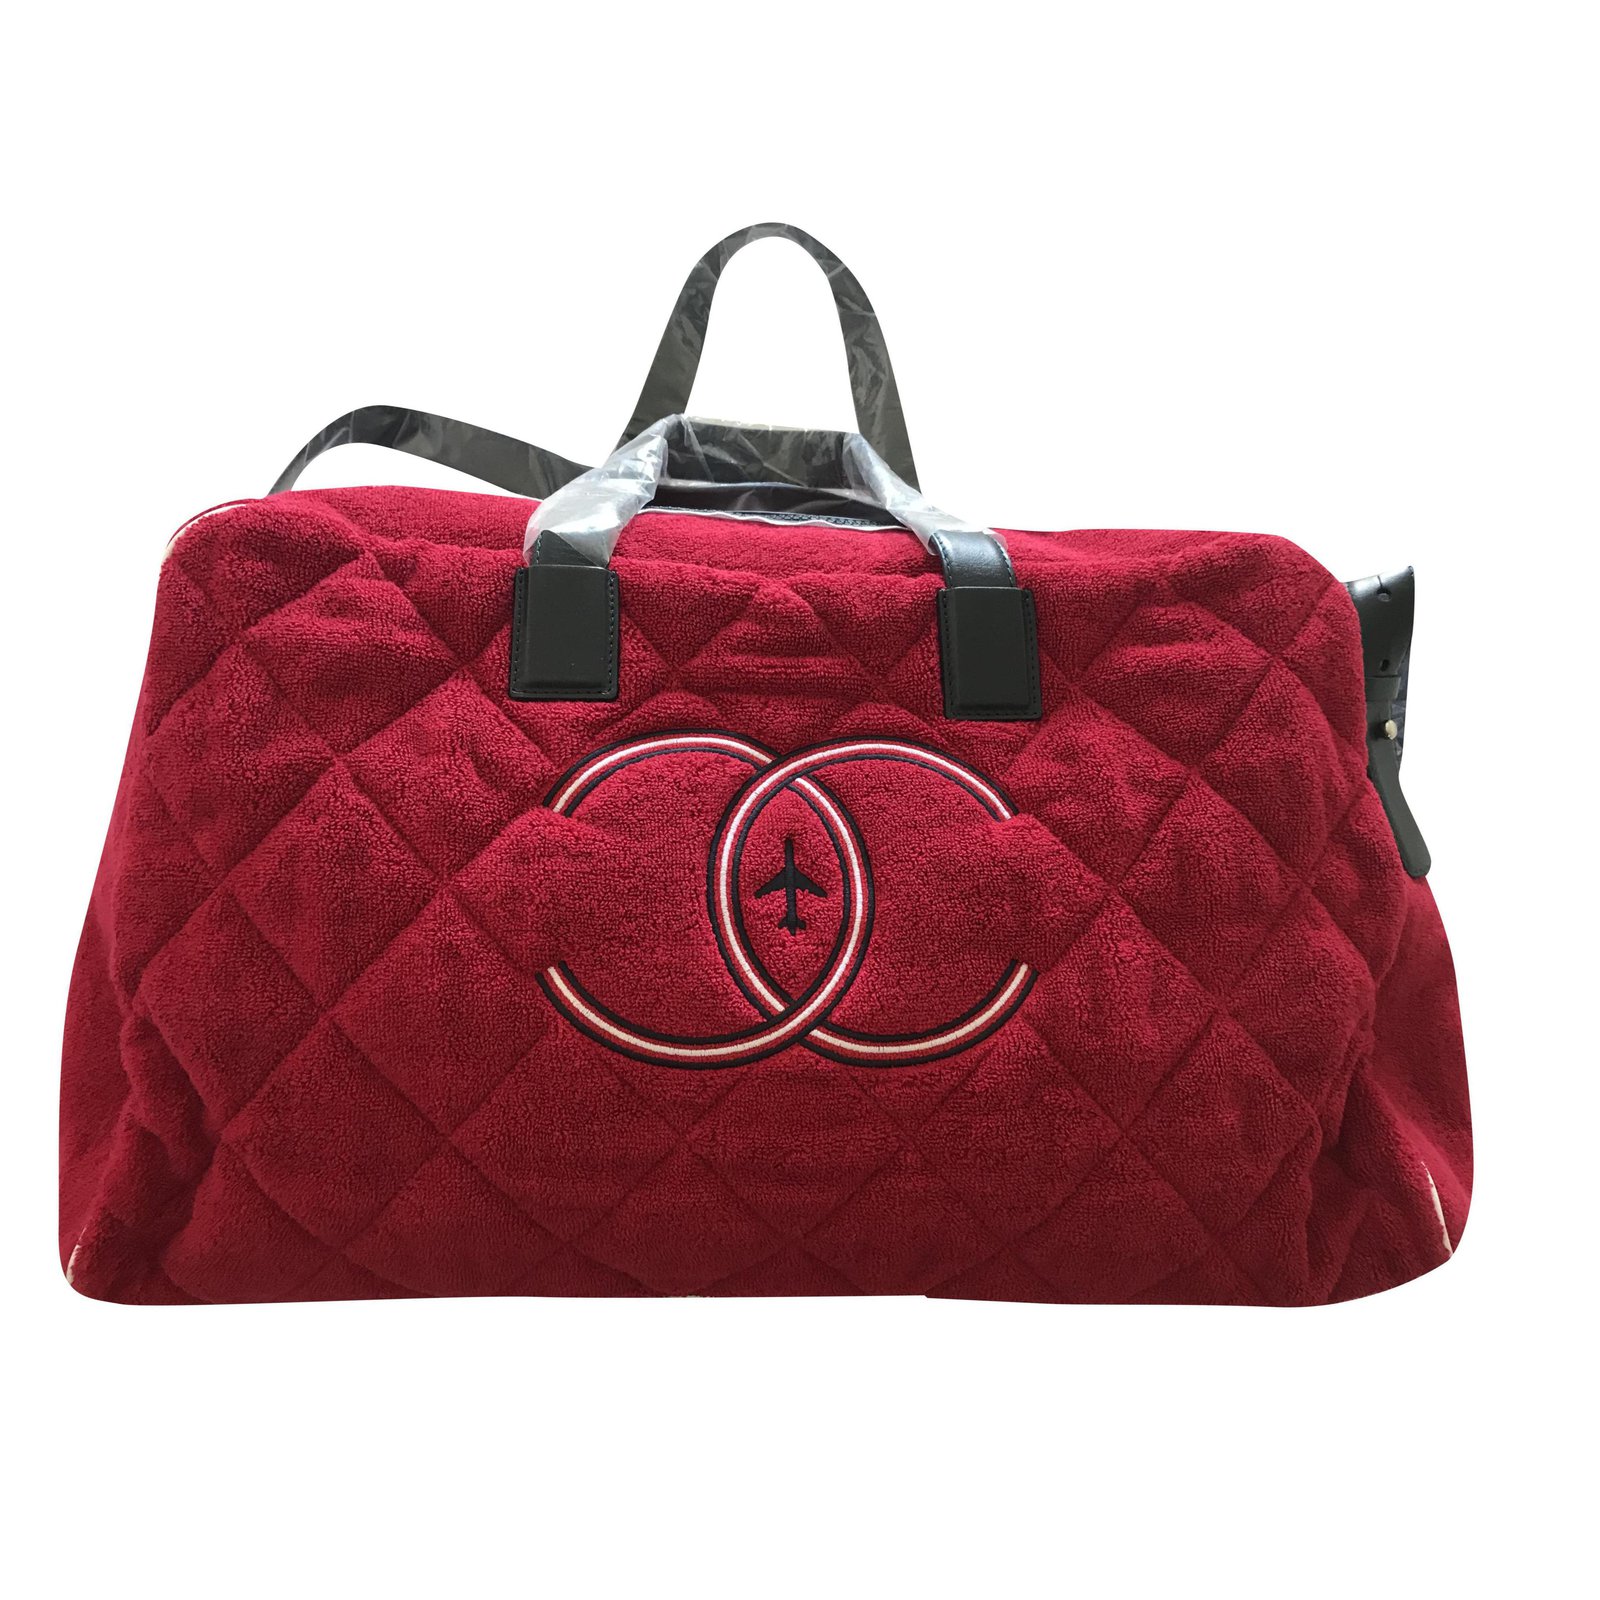 CHANEL N°1 Tote Bag Cotton Red Camellia 45 x 30 x 25 cm vip gift